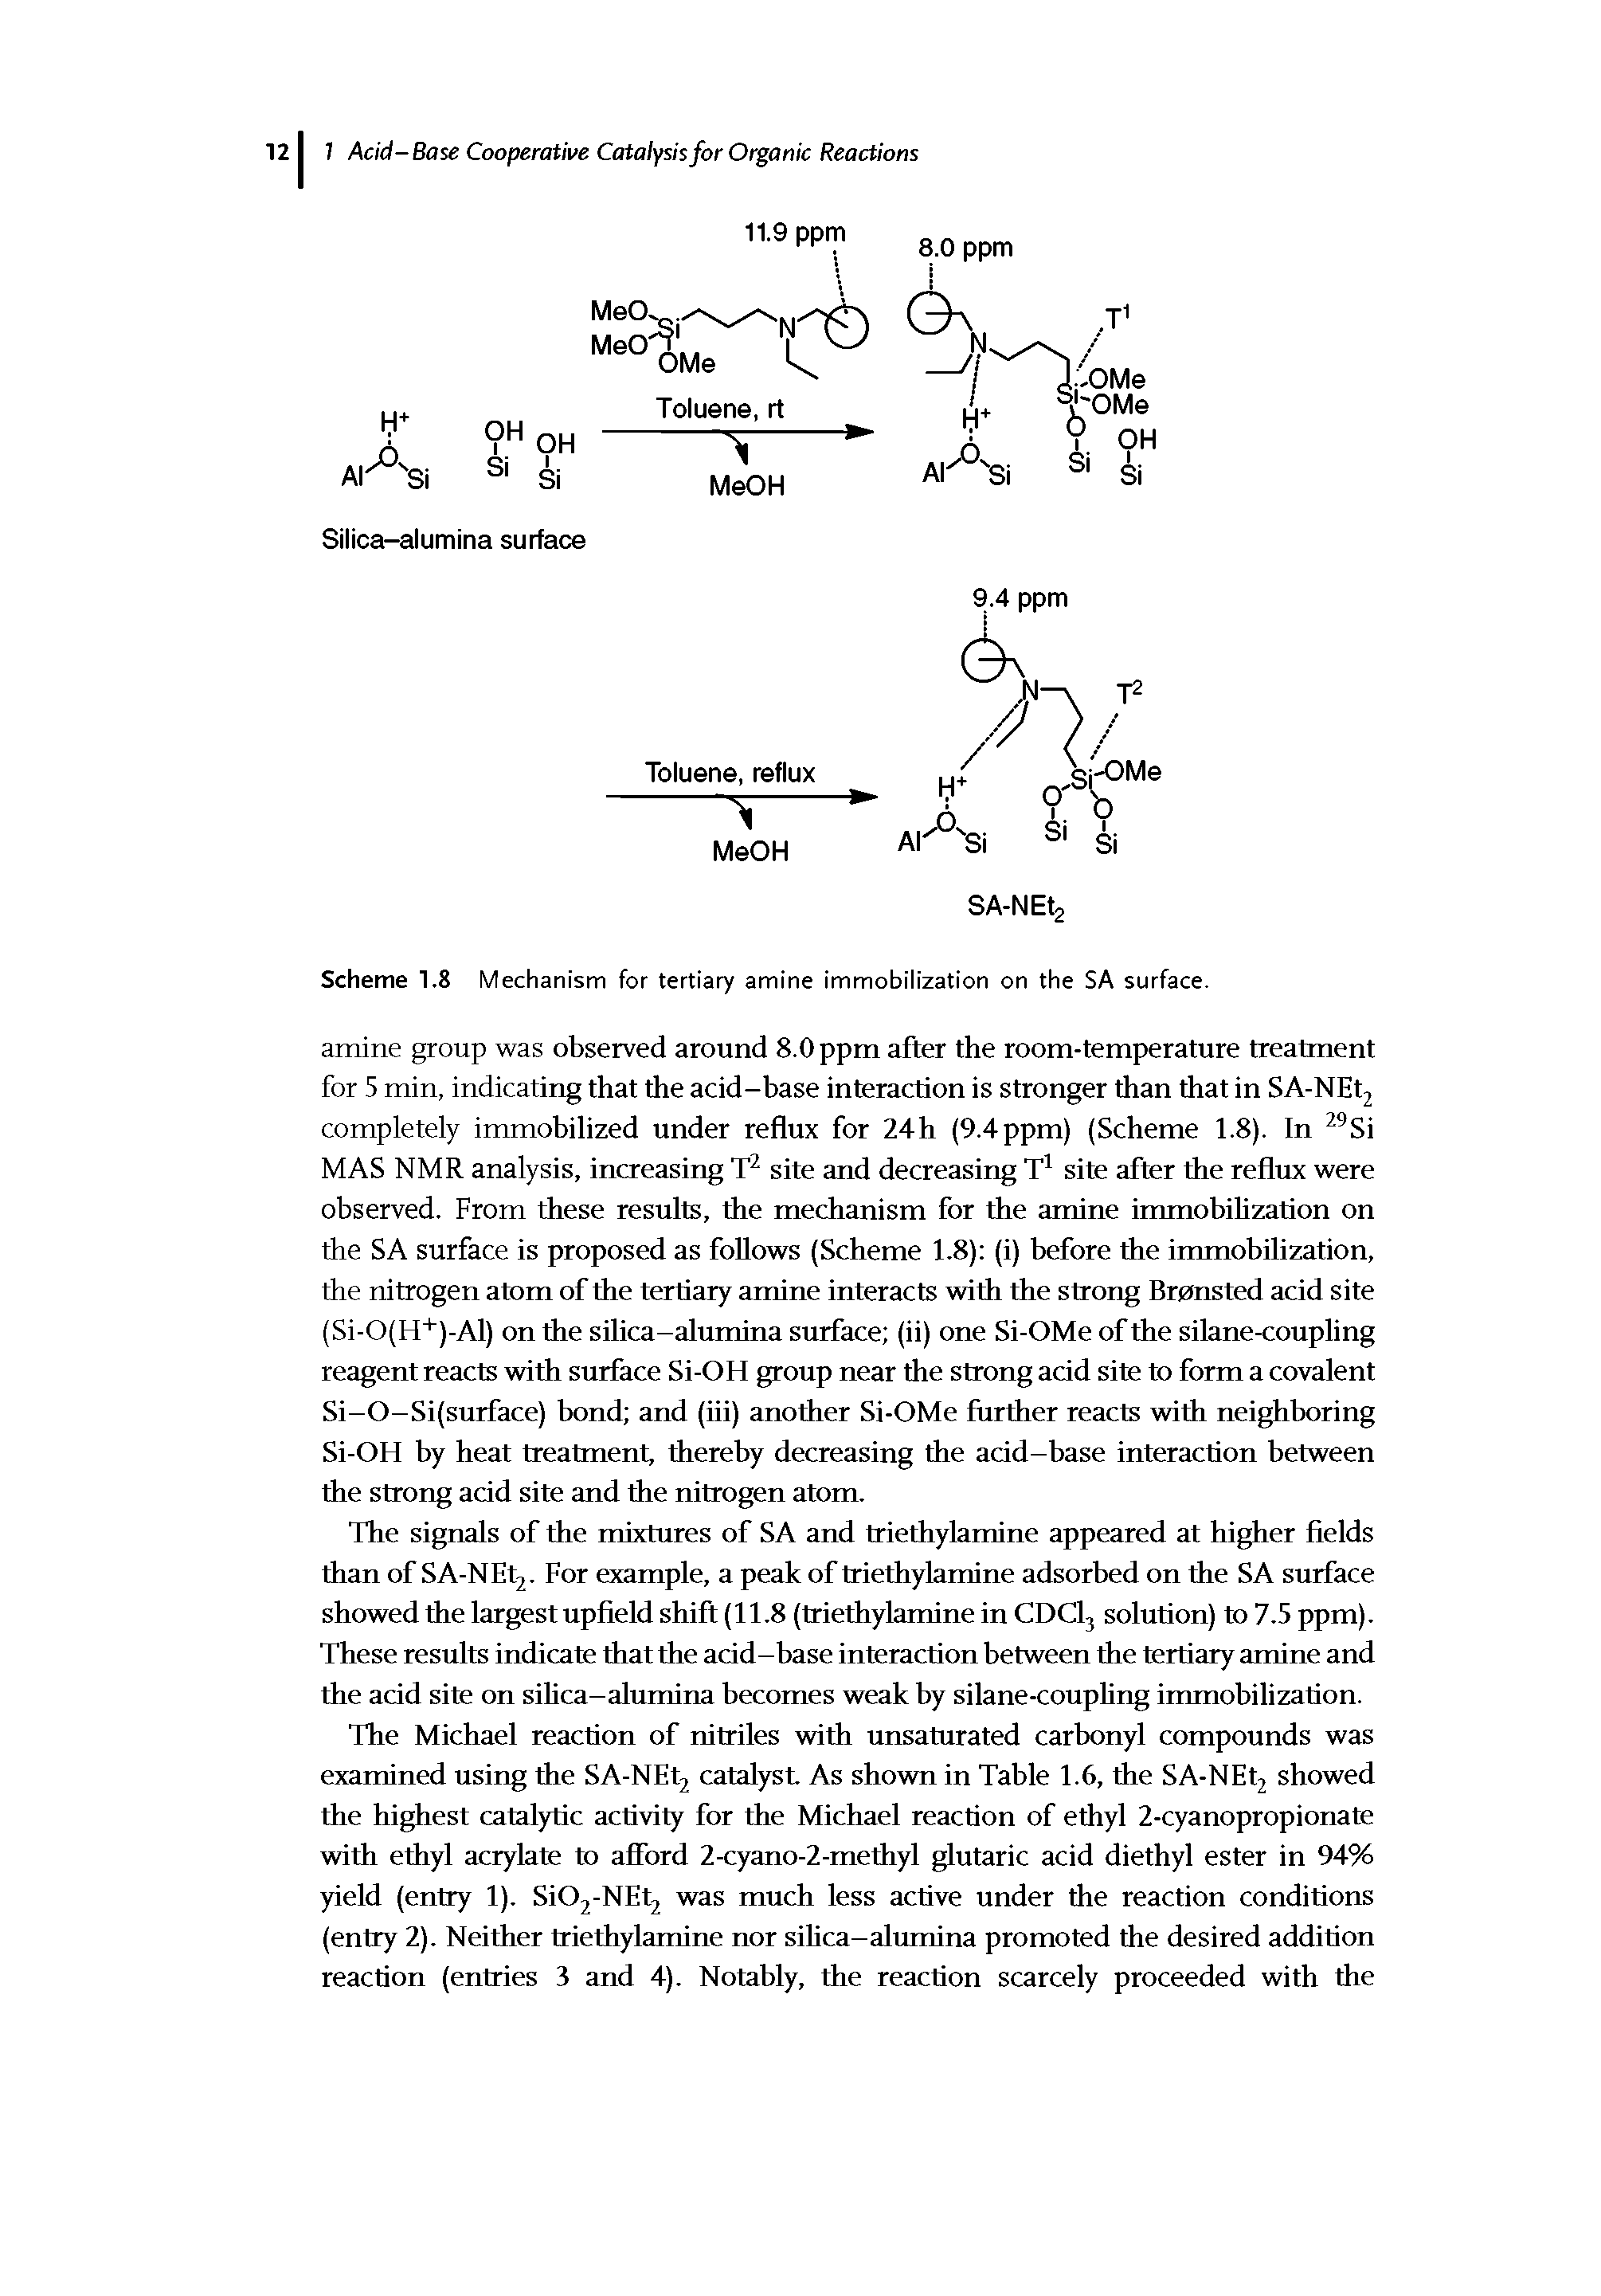 Scheme 1.8 Mechanism for tertiary amine immobilization on the SA surface.